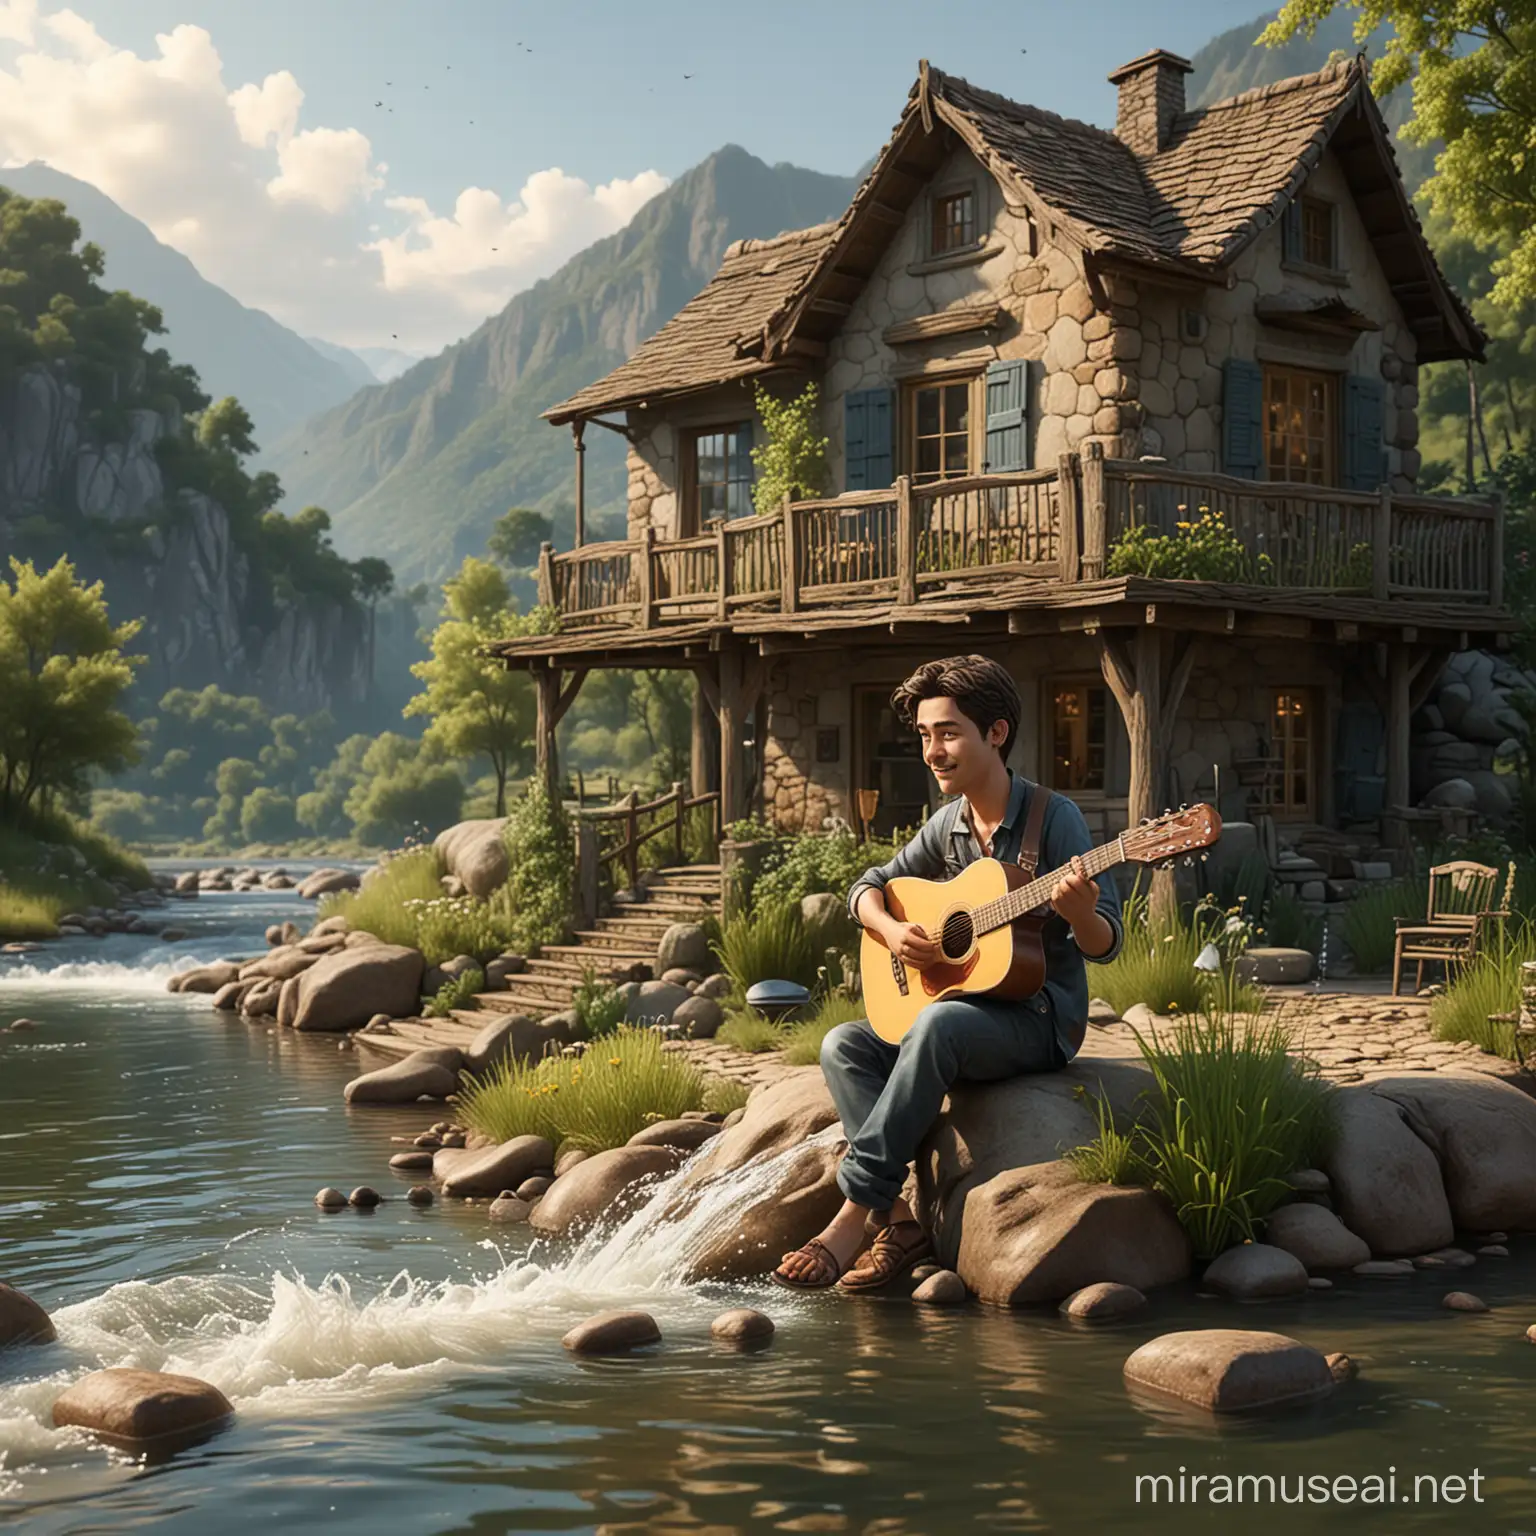 Handsome Man Playing Acoustic Guitar by Elegant House with Mountainous Nature Background